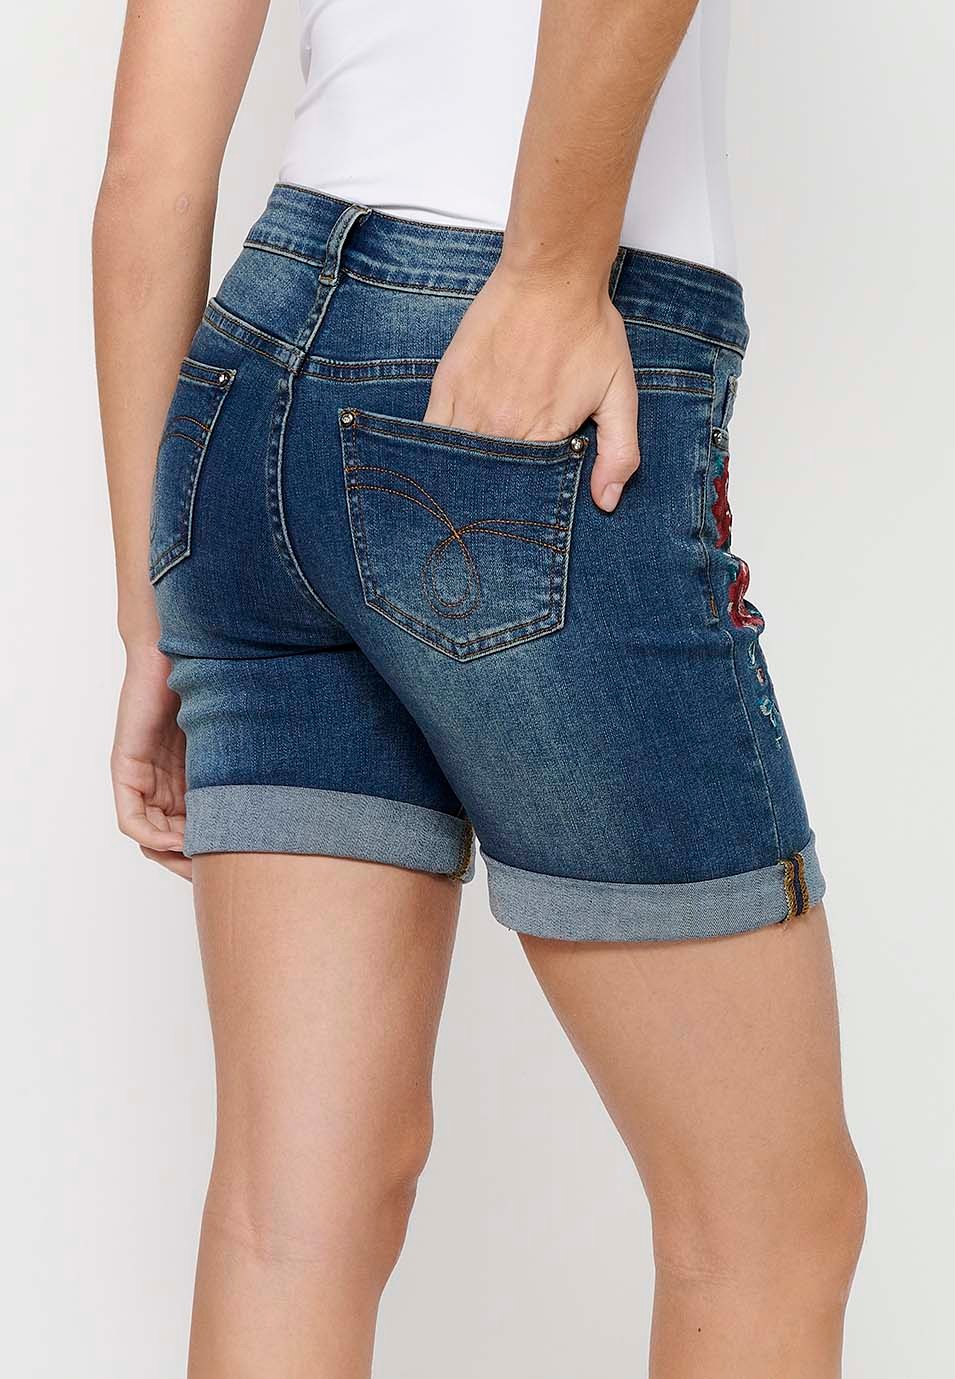 Denim shorts with front zipper and button closure and front floral embroidered details with five pockets, one pocket pocket, Dark Blue for Women 8